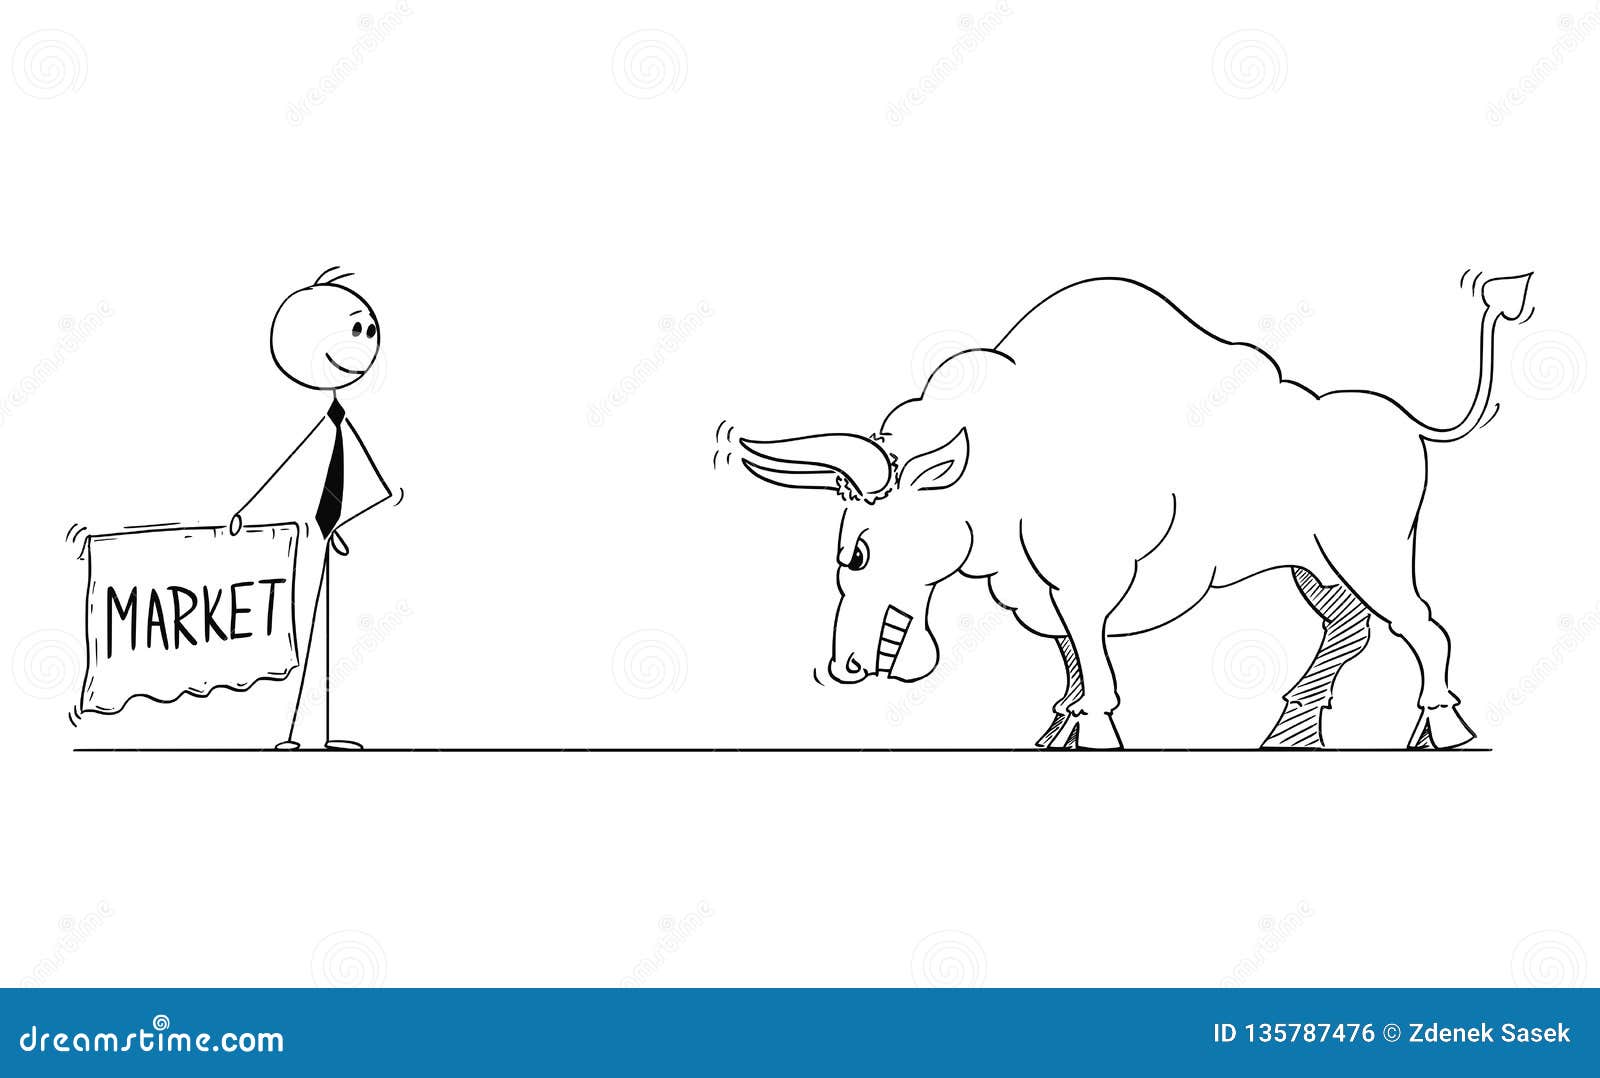 cartoon of businessman bullfighter provoking bull as rising market prices  with cloth or muleta